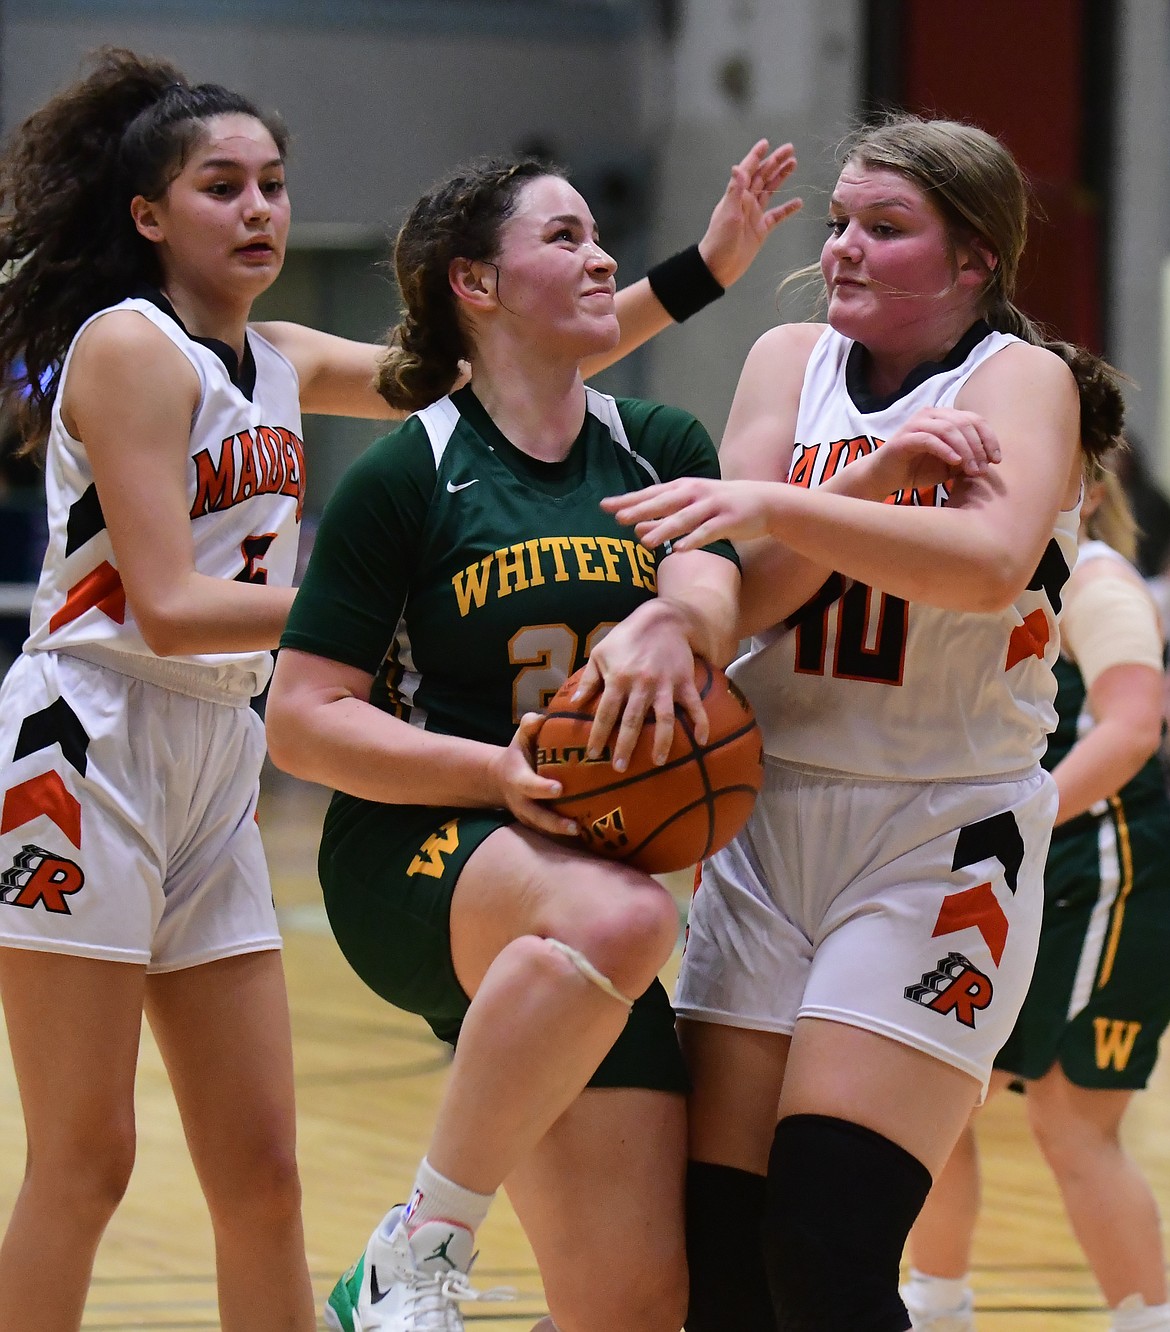 Whitefish’s Gracie Smyley goes up for a shot against Ronan during the first loser out bracket game of the state A tournament in Great Falls on Thursday. The Bulldogs beat Ronan 56-49. (Teresa Byrd/Hungry Horse News)